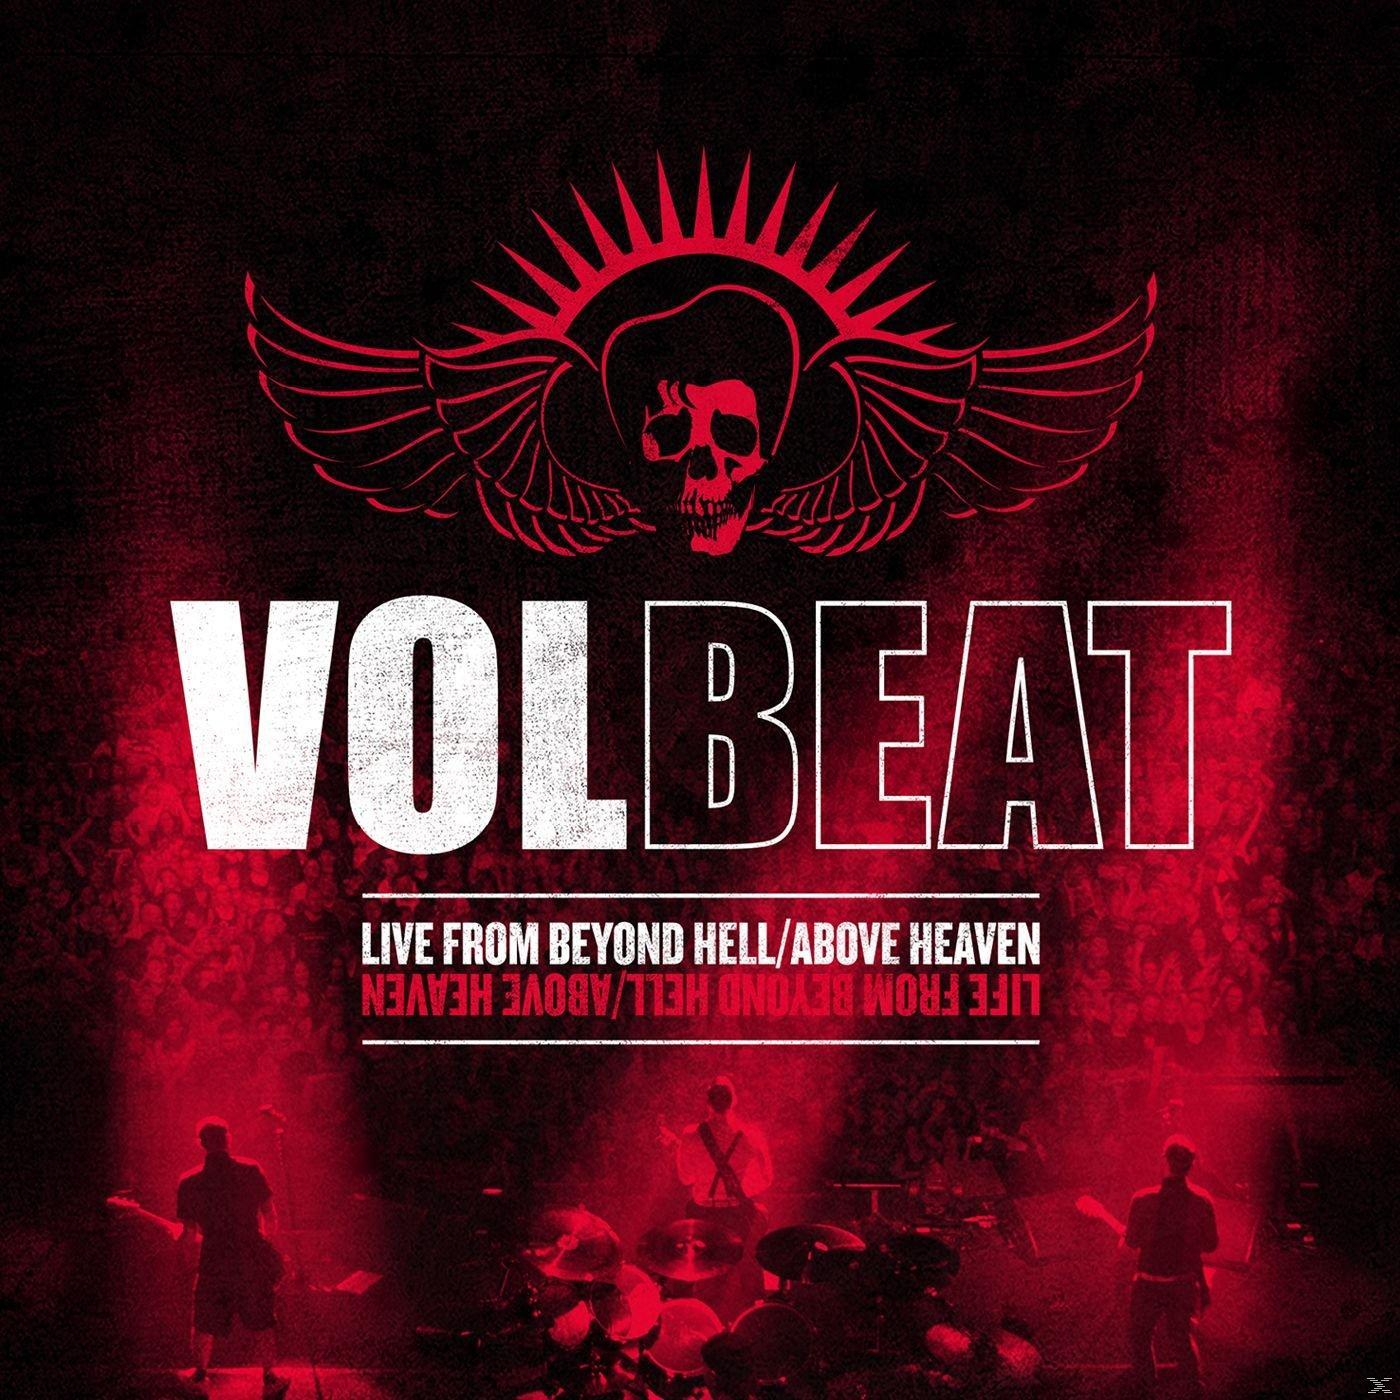 Heaven Volbeat - Hell/Above Beyond - (Vinyl) From Live